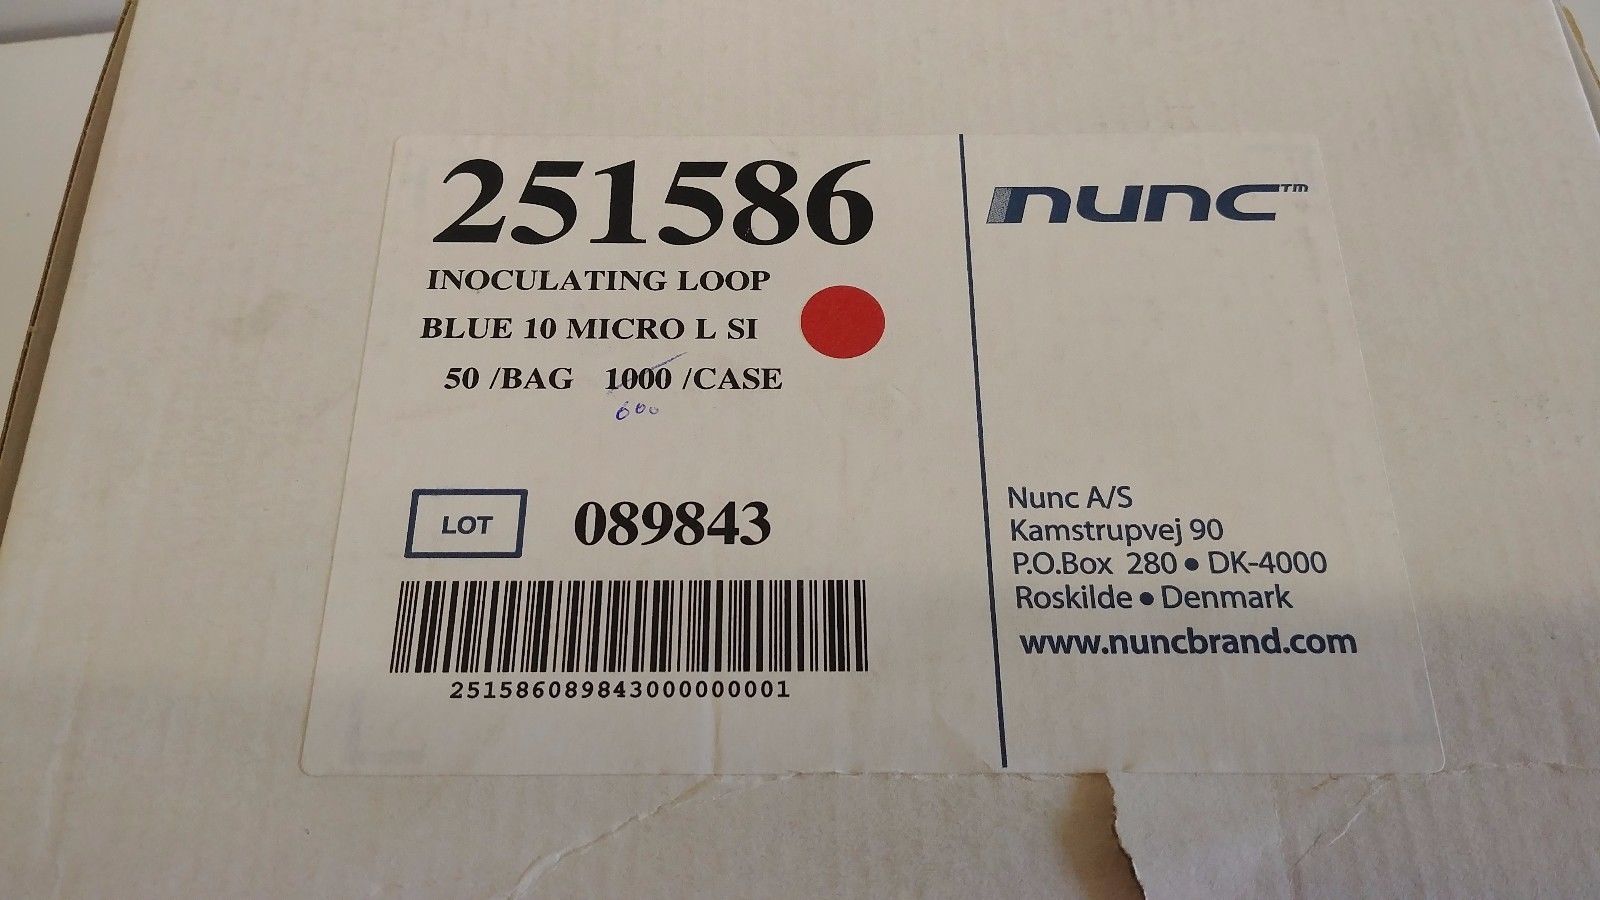 NUNC, DISPOSABLE LOOPS AND NEEDLES, #251586